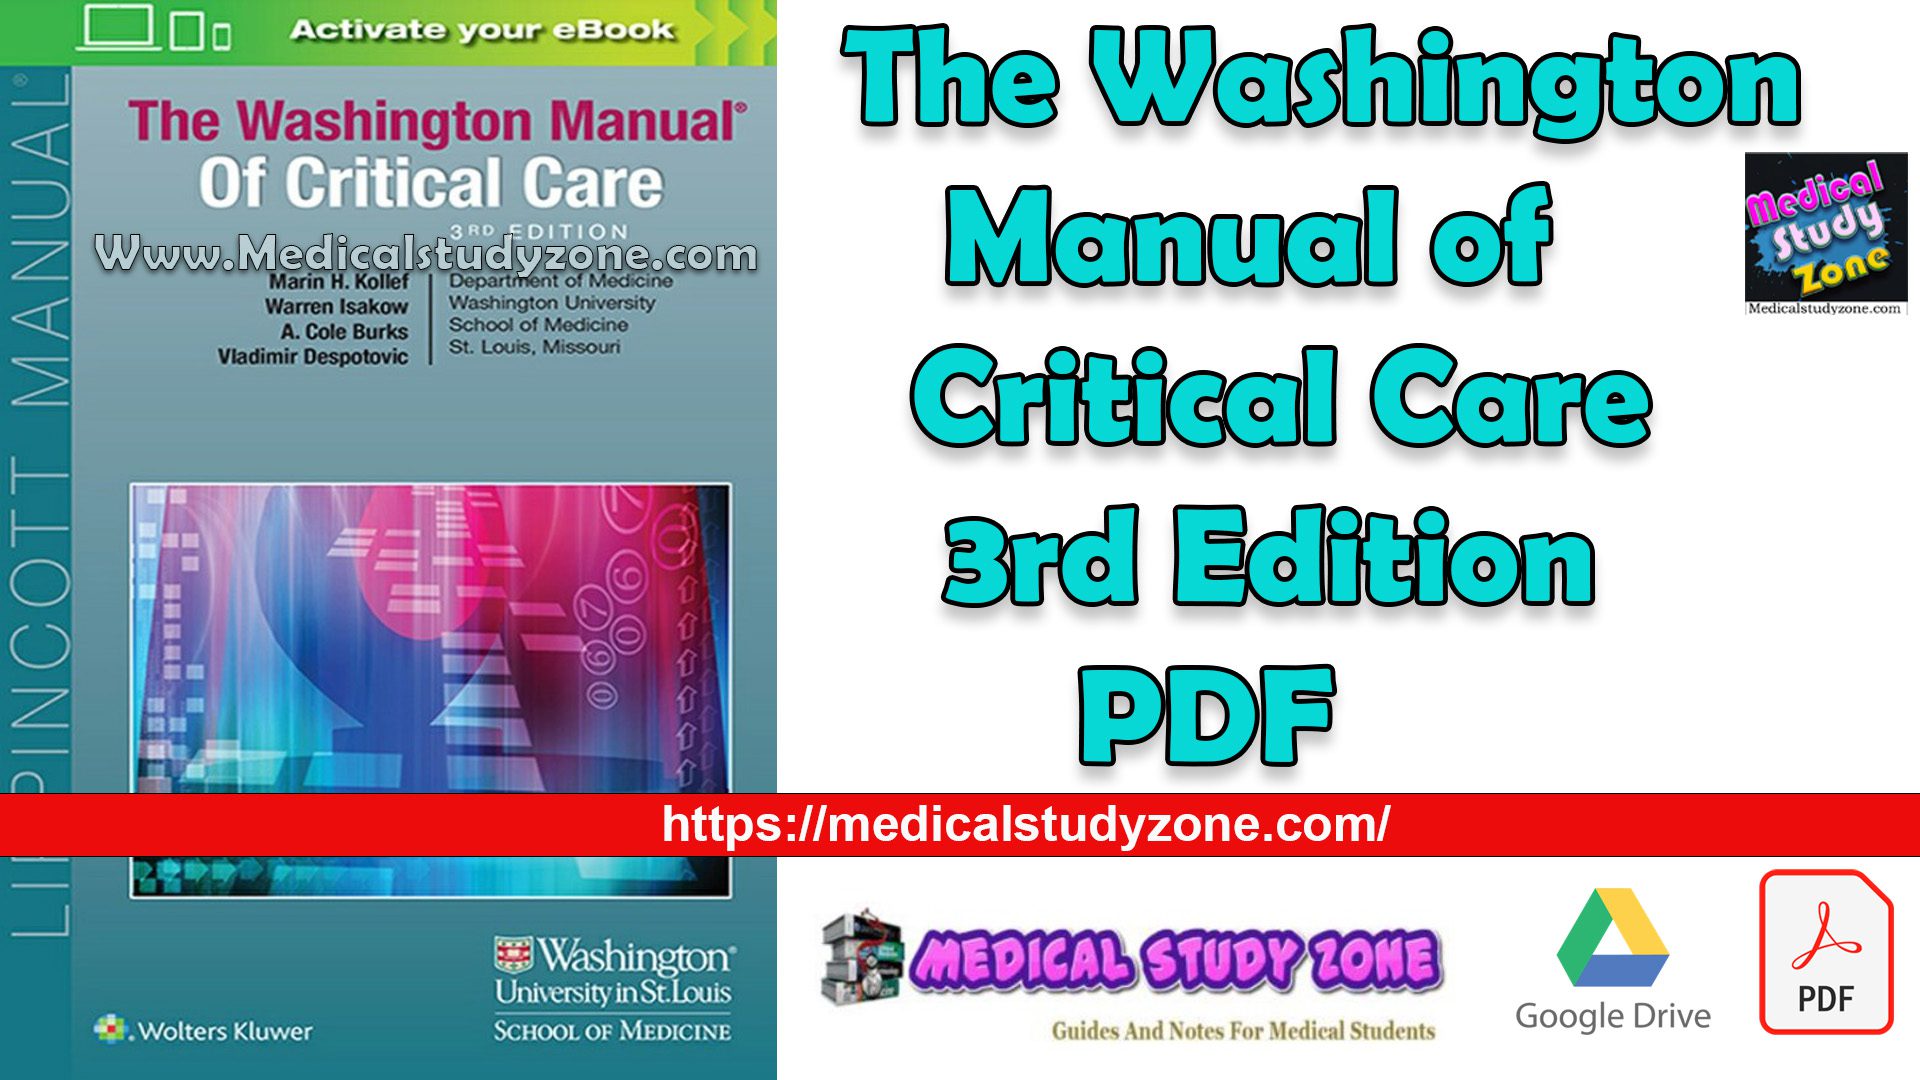 The Washington Manual of Critical Care 3rd Edition PDF Free Download